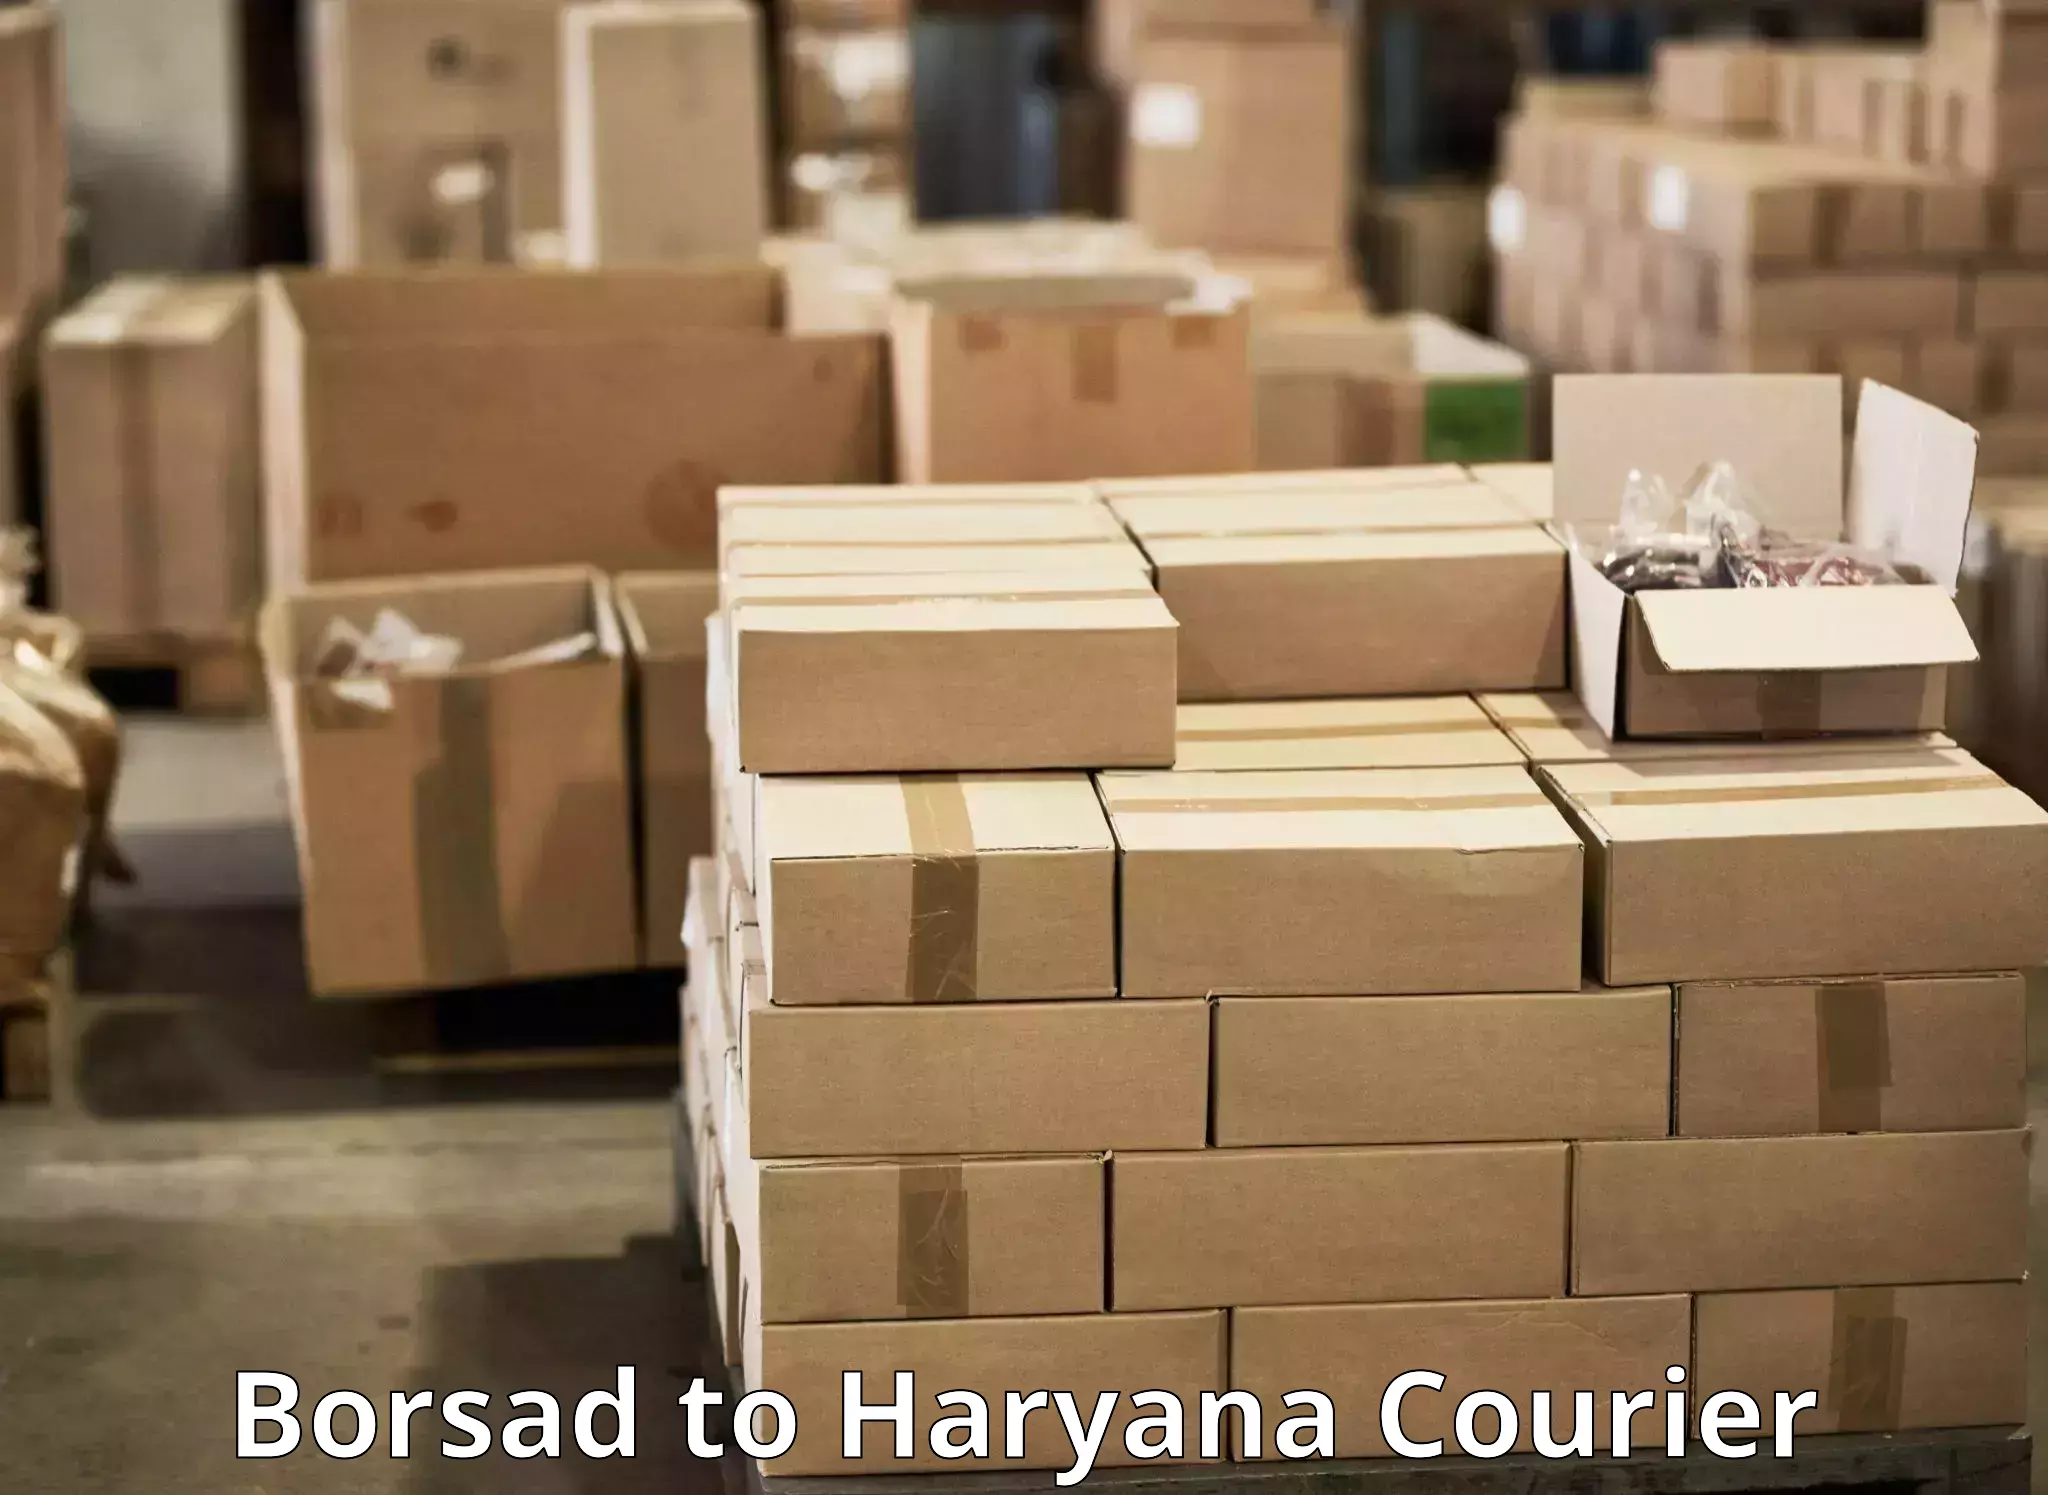 Reliable delivery network Borsad to Hansi